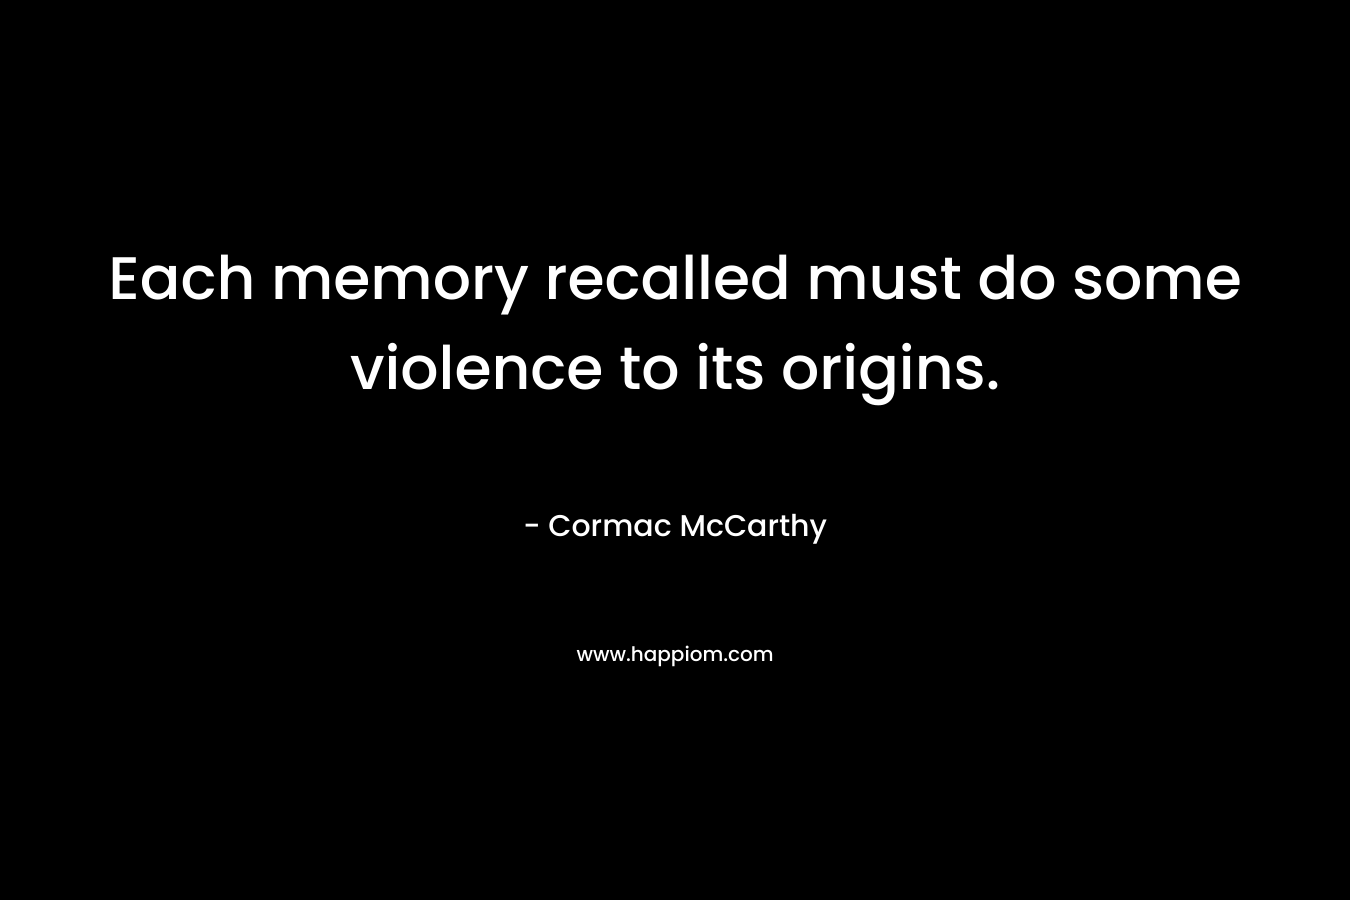 Each memory recalled must do some violence to its origins.